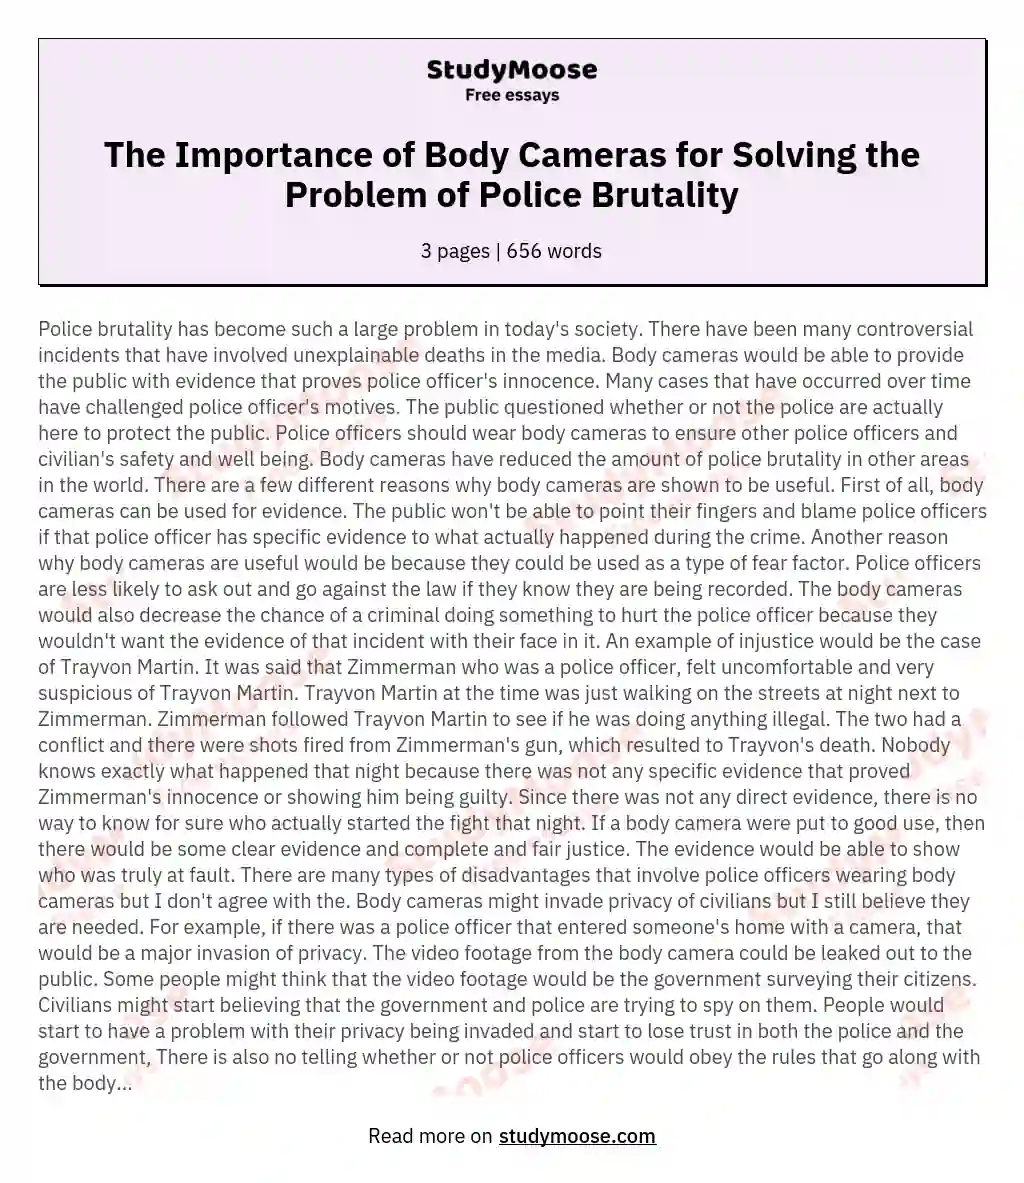 The Importance of Body Cameras for Solving the Problem of Police Brutality essay